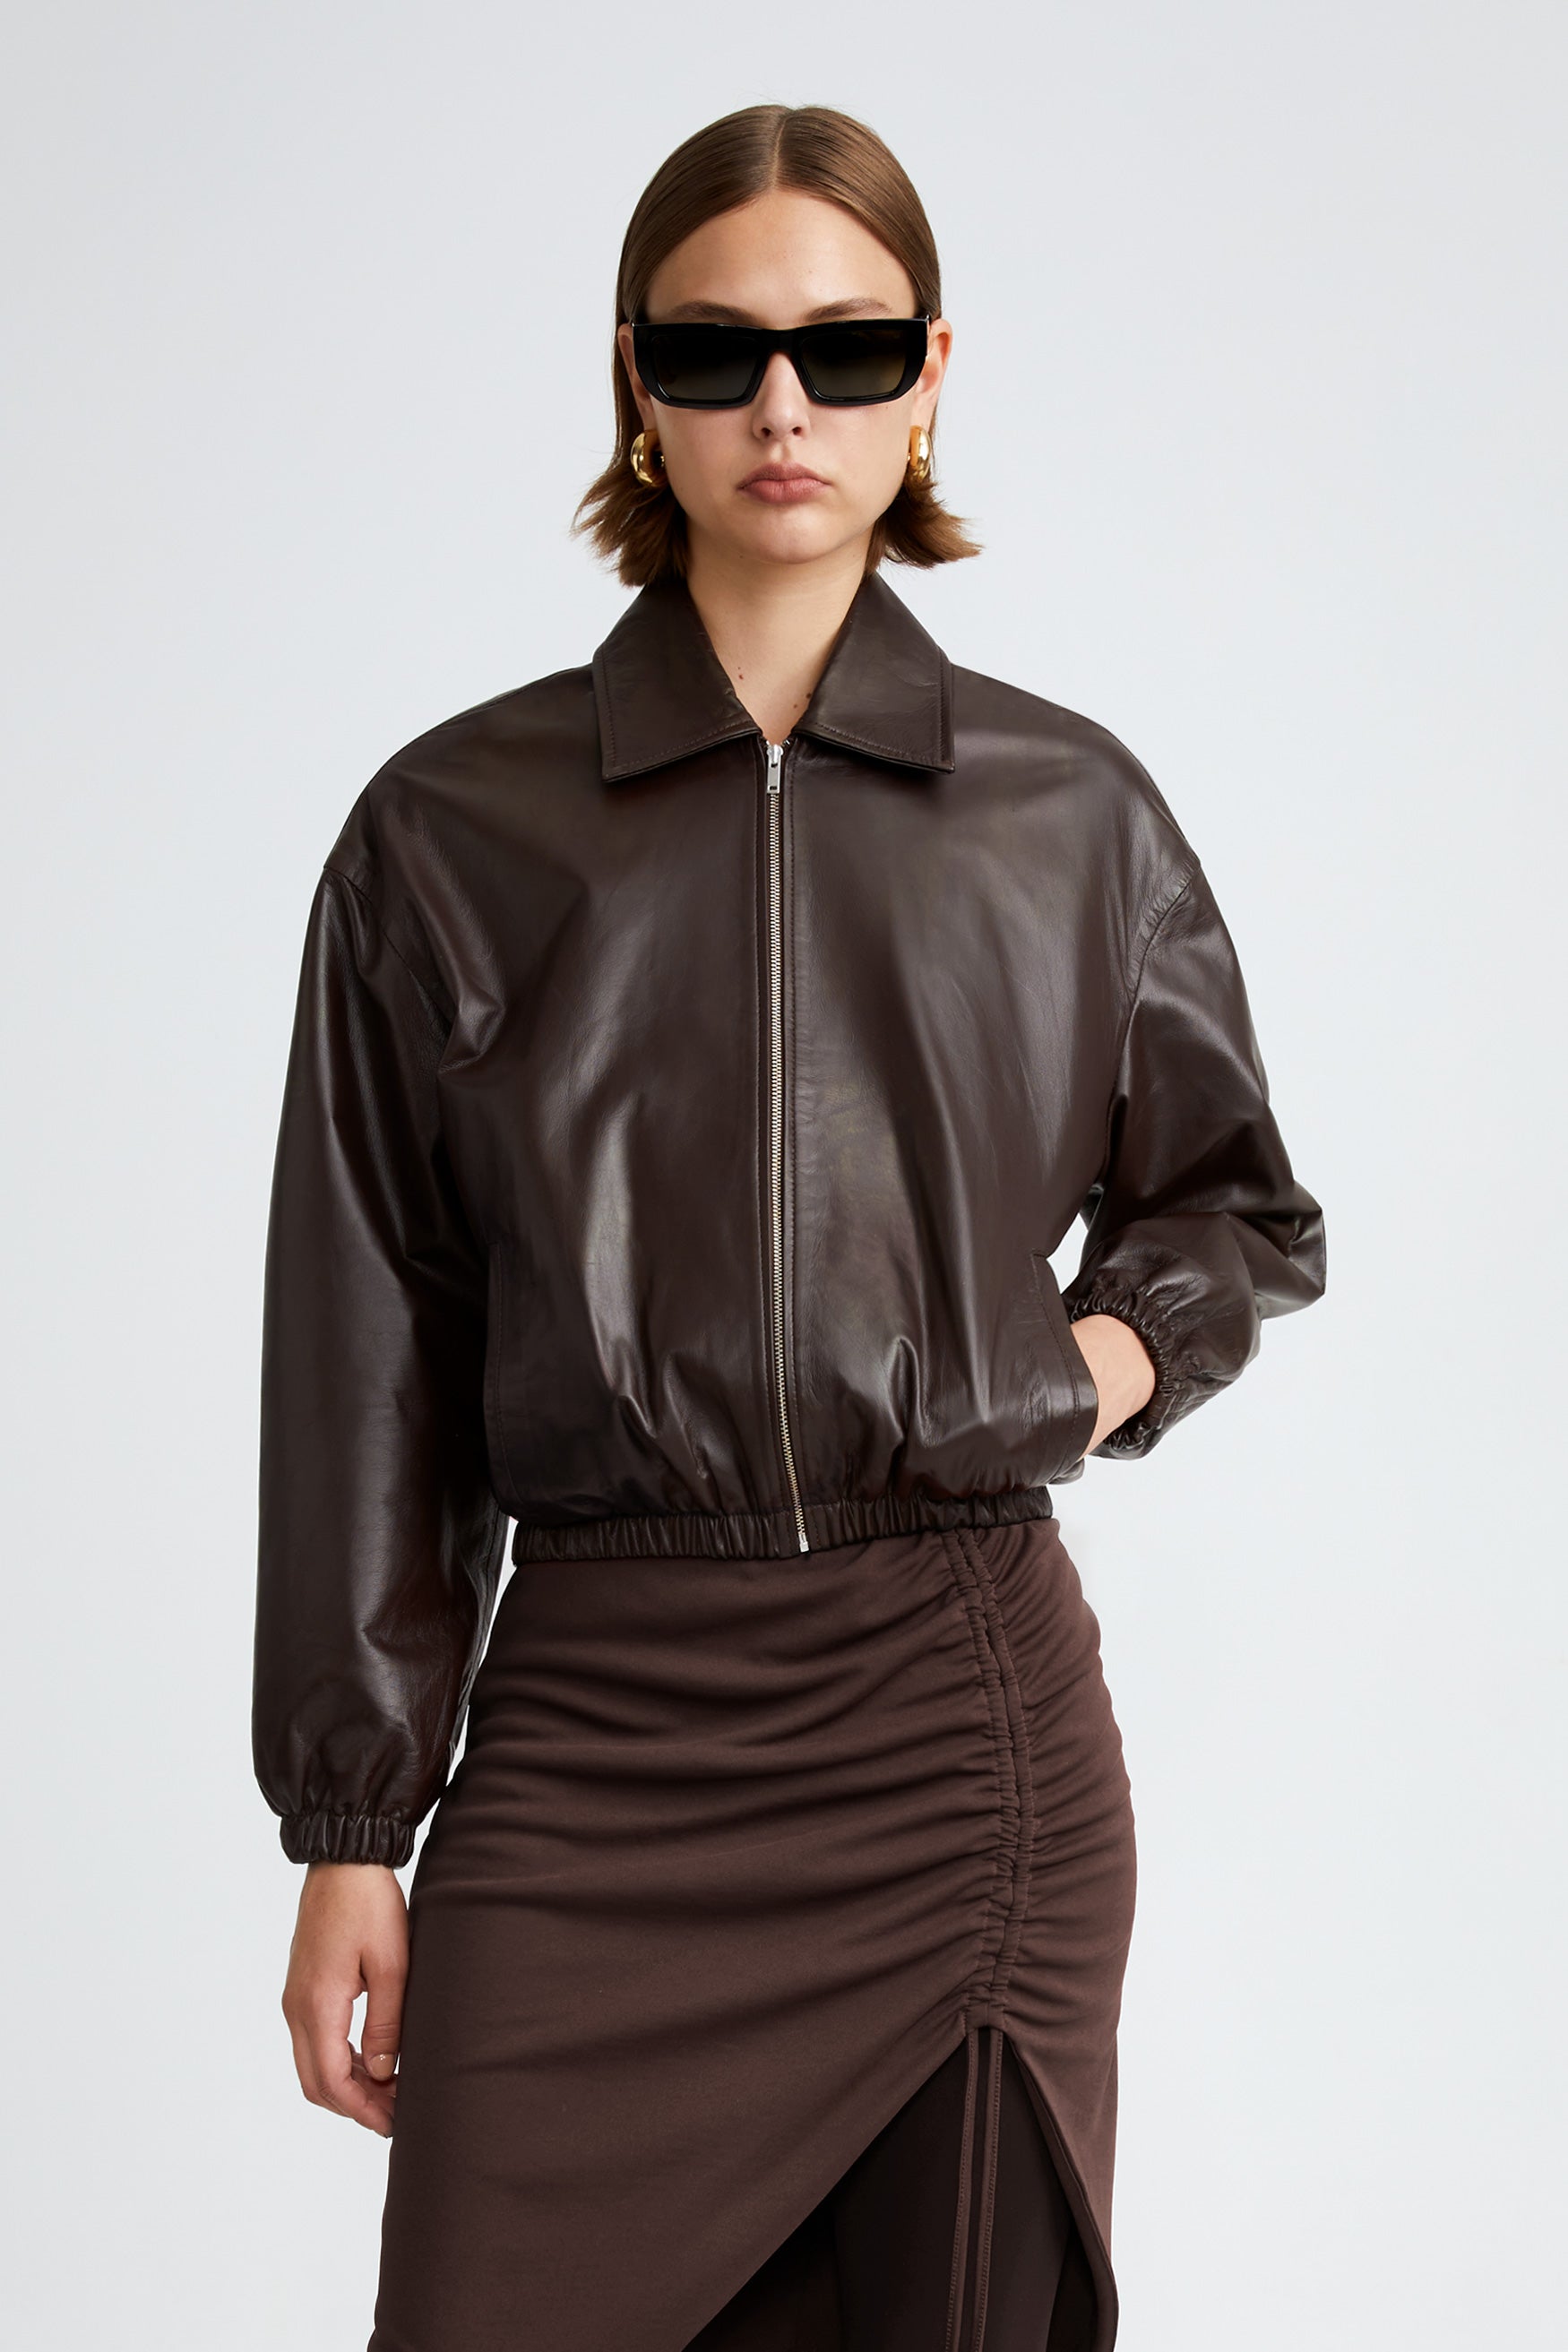 Model is wearing the Luna Dark Chocolate Leather Bomber Jacket Close Up